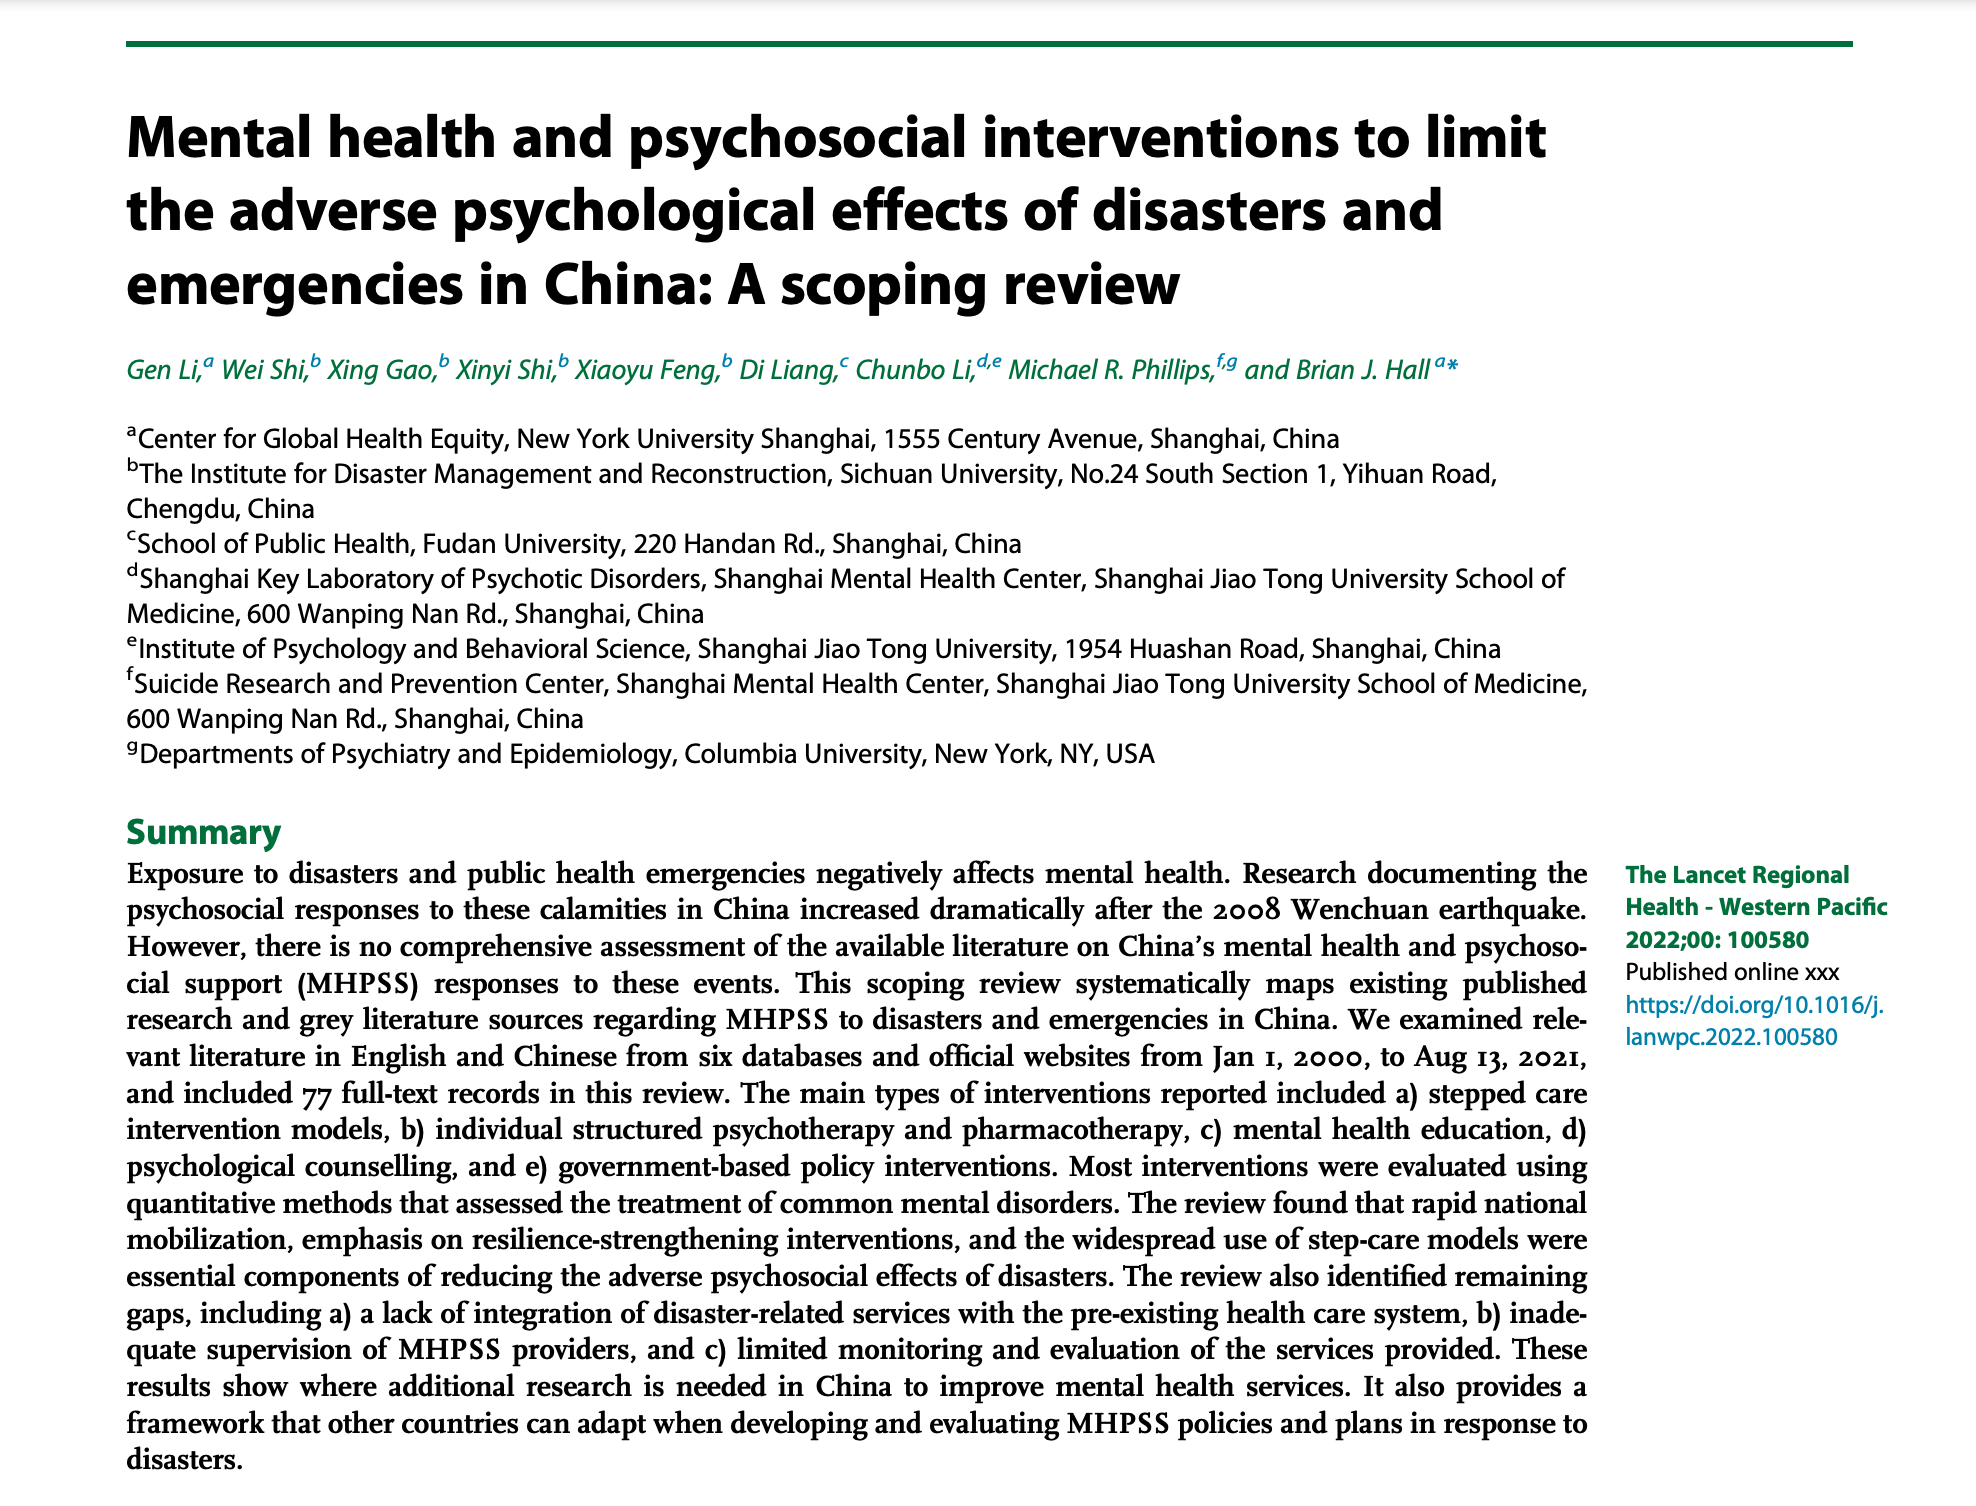 Scoping review on MHPSS in China